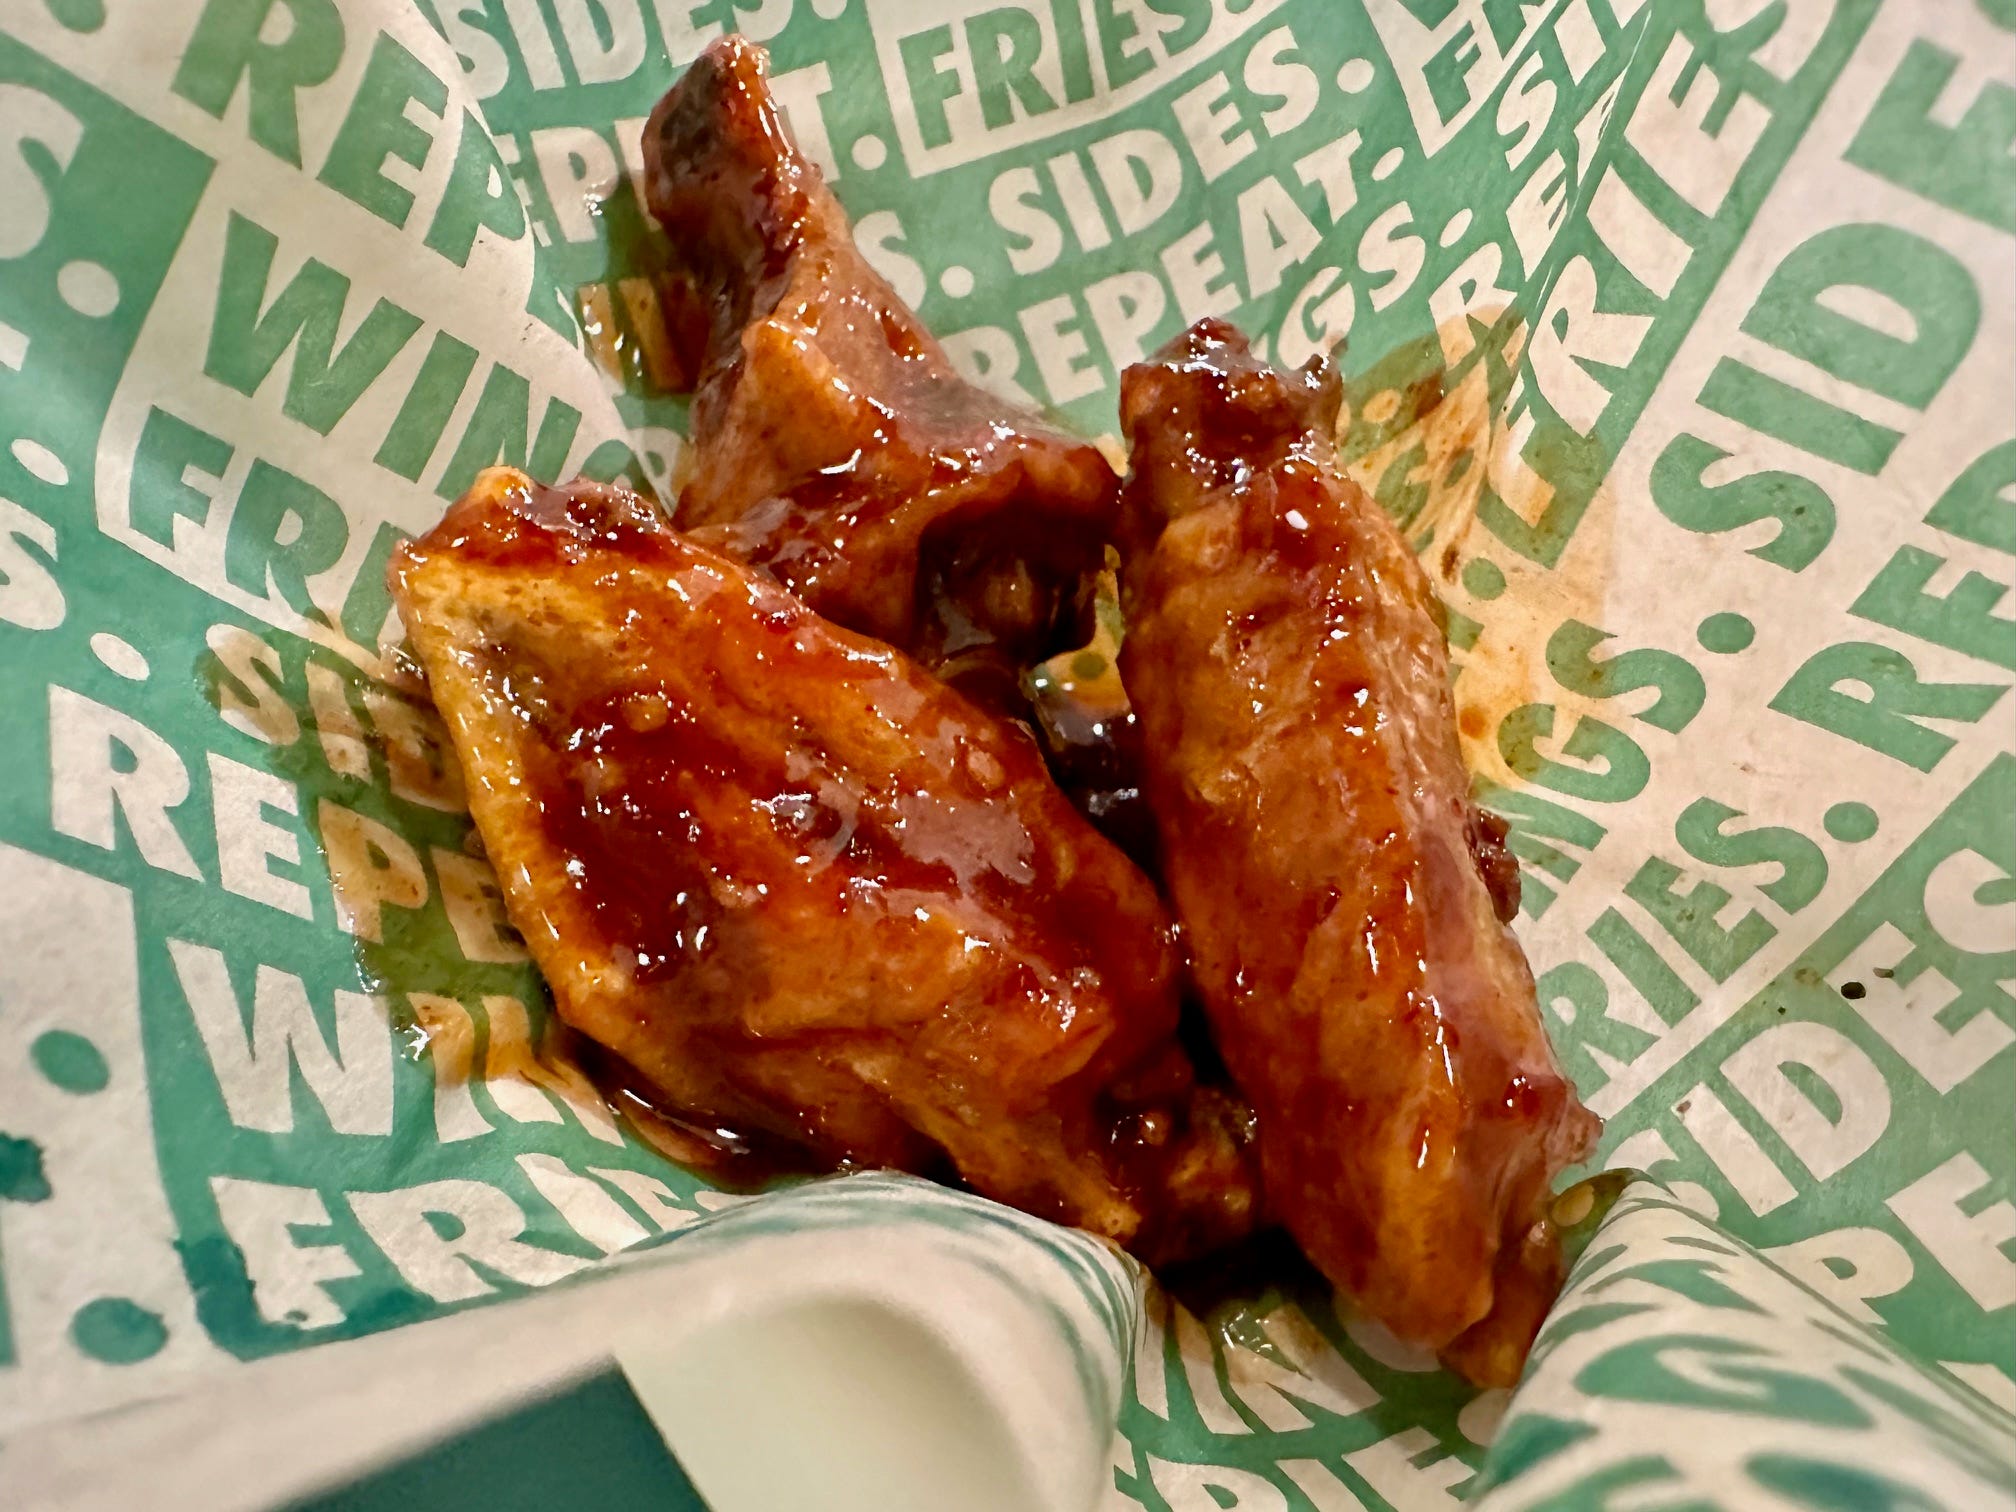 <p>The Spicy Korean Q wings are described on Wingstop's menu as a "sweet and spicy" wing made with ginger, garlic, sriracha, and crushed red pepper.</p><p>The heat level is three flames out of five on the Wingstop scale.</p><p>It was nearly identical in taste to Popeyes' Sweet 'N Spicy wings.</p><p>But the Popeyes Sweet 'N Spicy wing had more heat and bolder flavors.</p><p><strong>Winner: Popeyes.</strong></p>